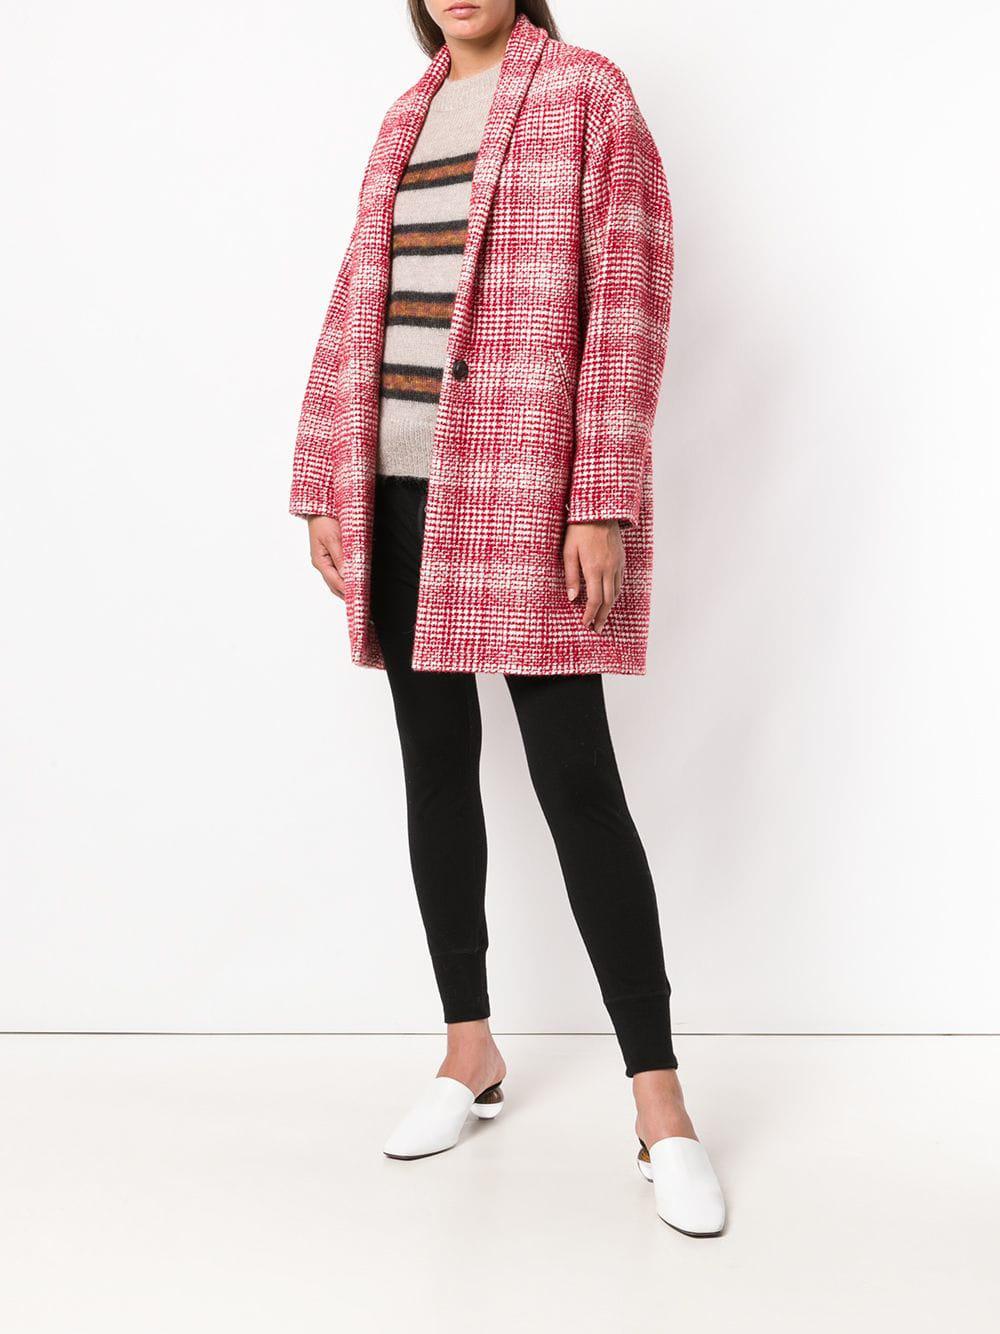 Étoile Isabel Marant Ebrie Checked Wool-blend Coat in Red - Lyst